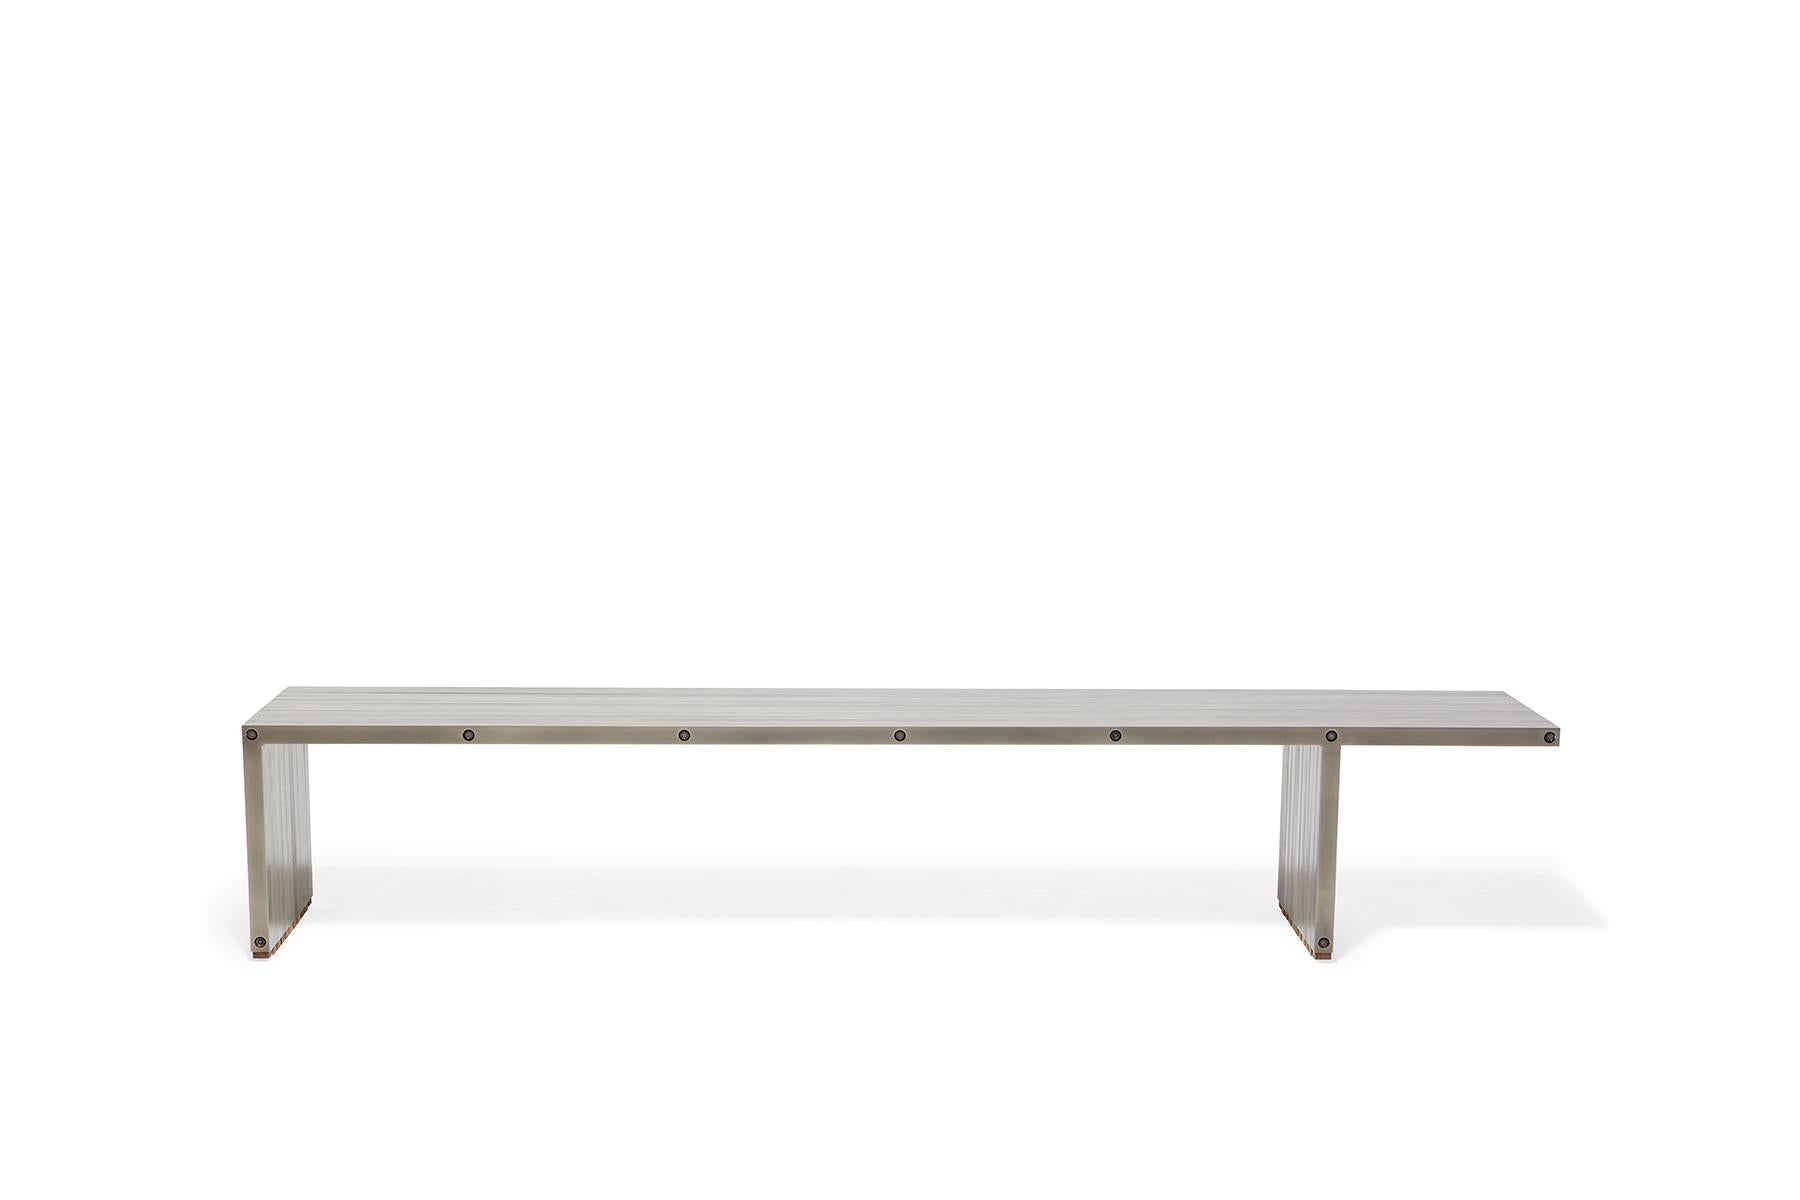 The Compression Bench by Stephen Kenn is a celebration of simplicity and strength. The bars are held together without nails or welds, but through compression along steel rods. The Compression Bench can be paired with the matching Compression Table